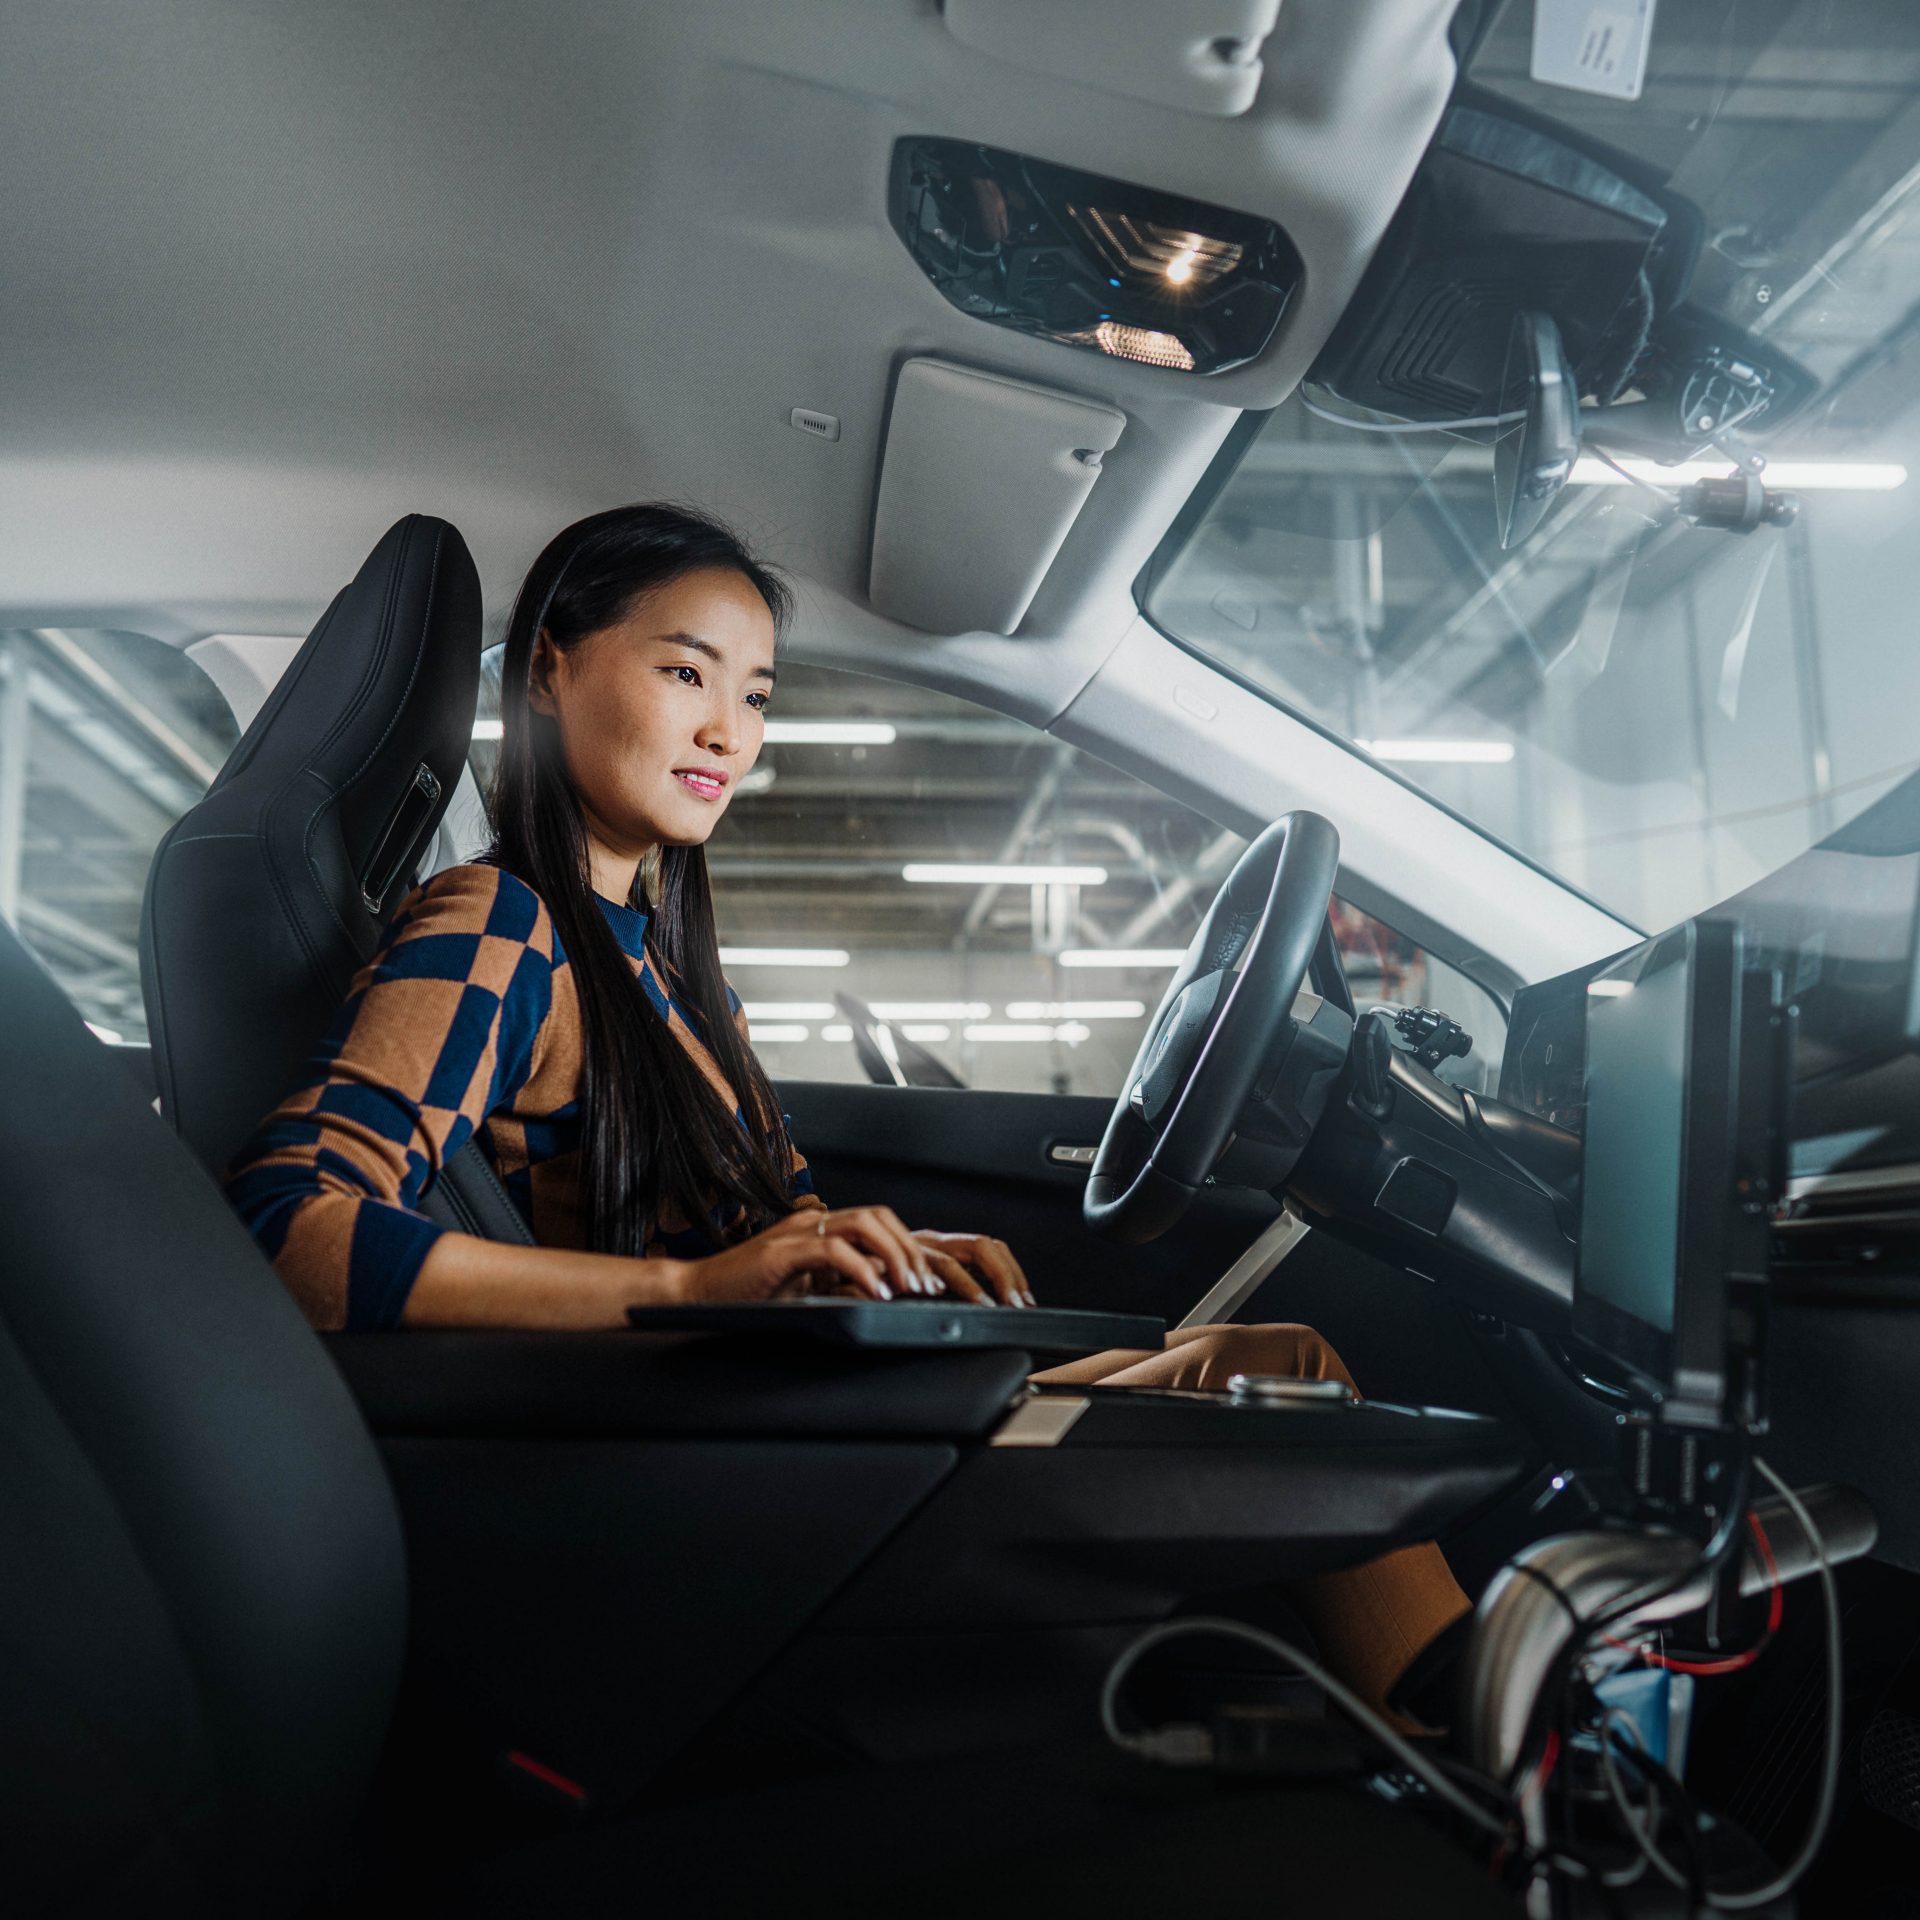 The image shows a BMW Group employee analysing data in a vehicle.